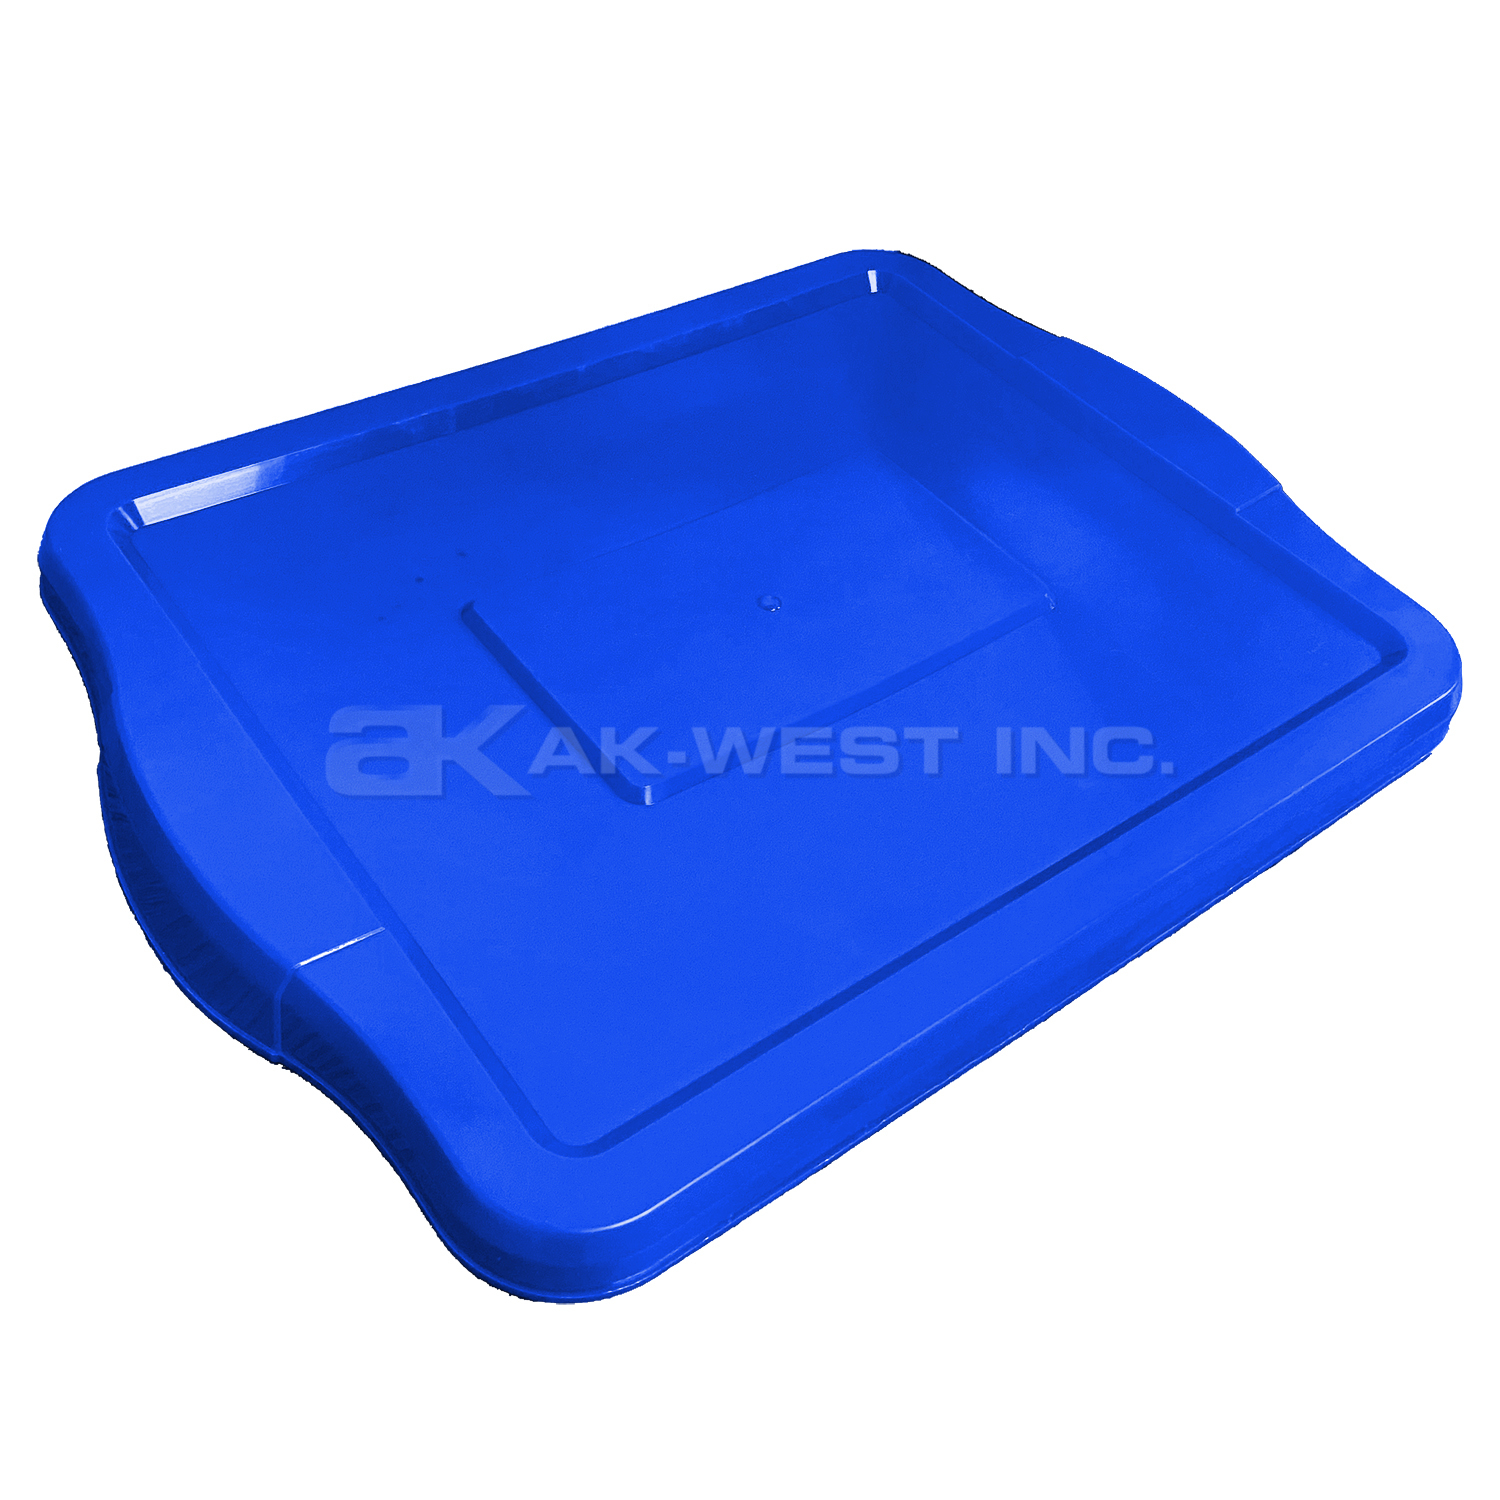 Blue, 19" x 15.5", Flat Storage Lid for N401600 and N402290 Recycling Containers